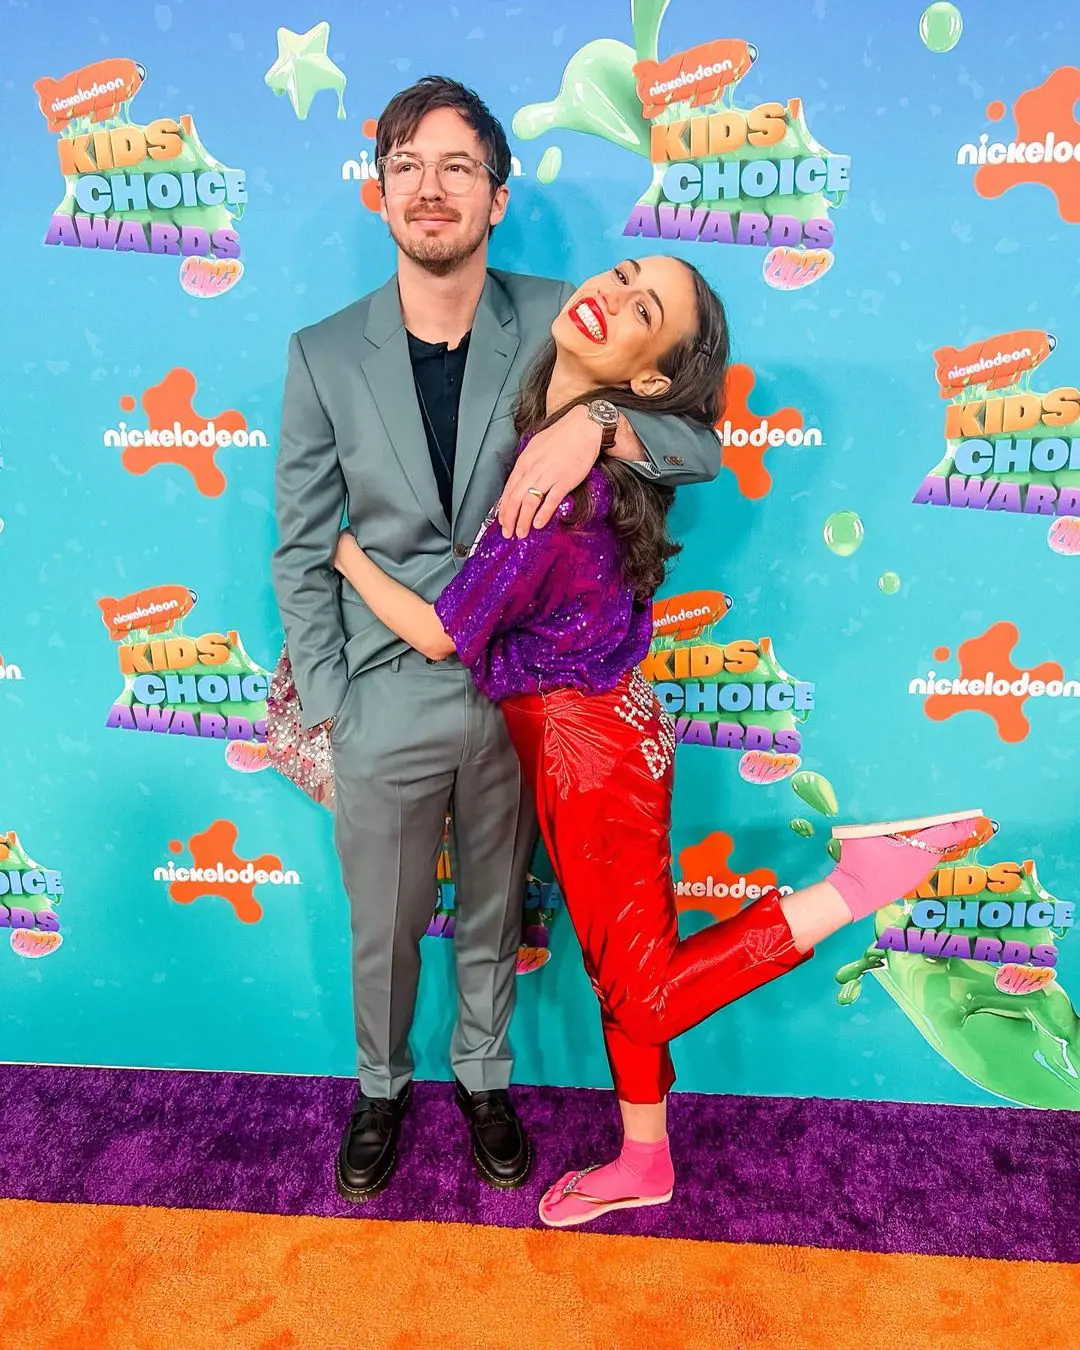 Colleen and Eric at the Teen Choice Awards on March 6, 2023